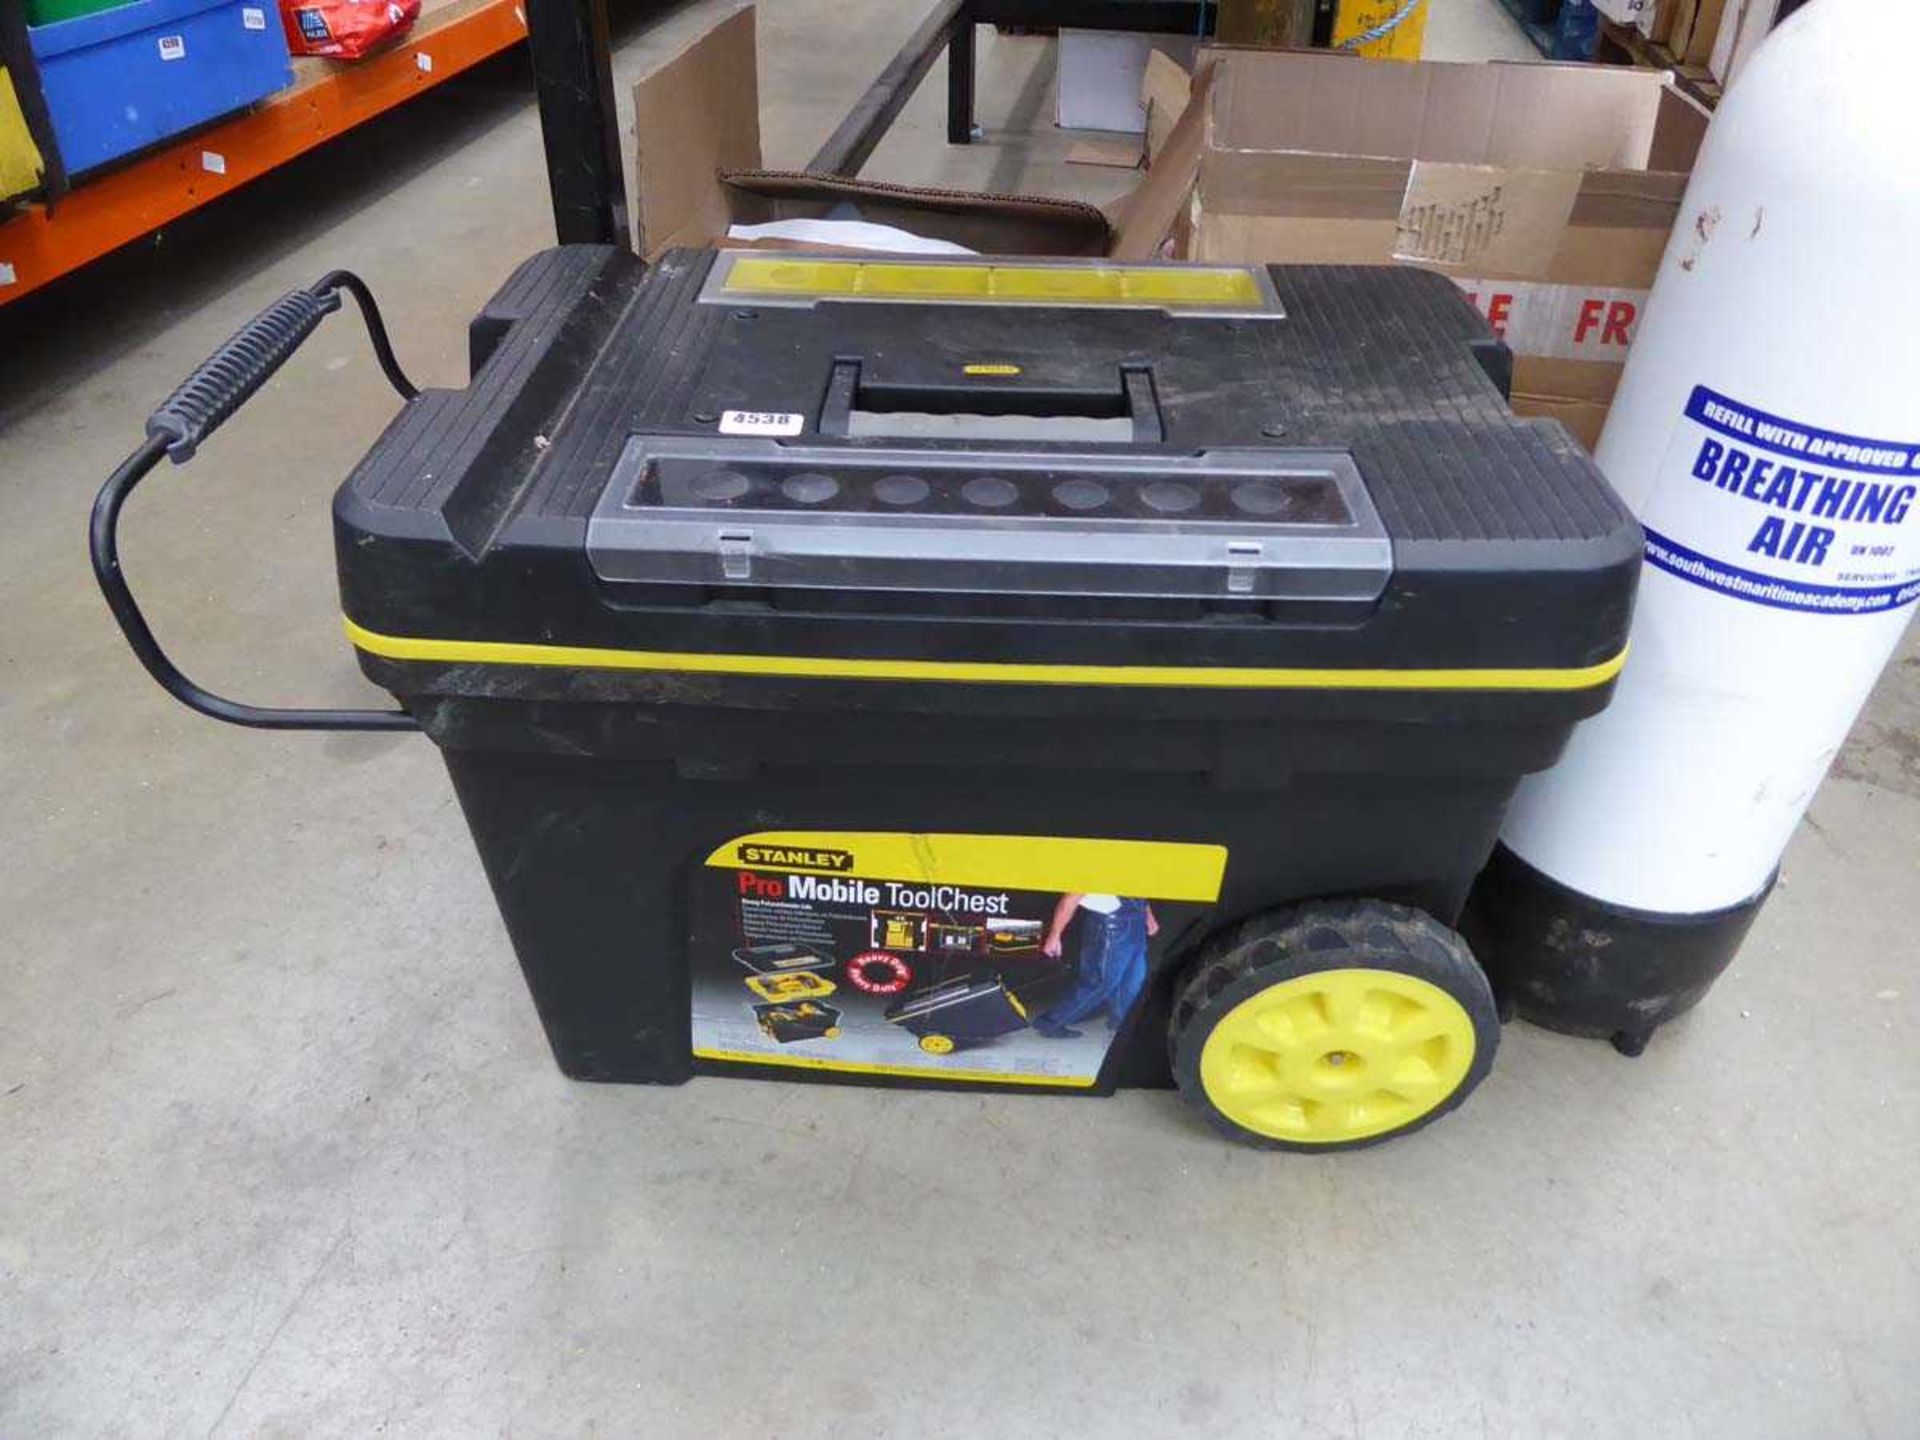 Stanley Pro mobile tool chest